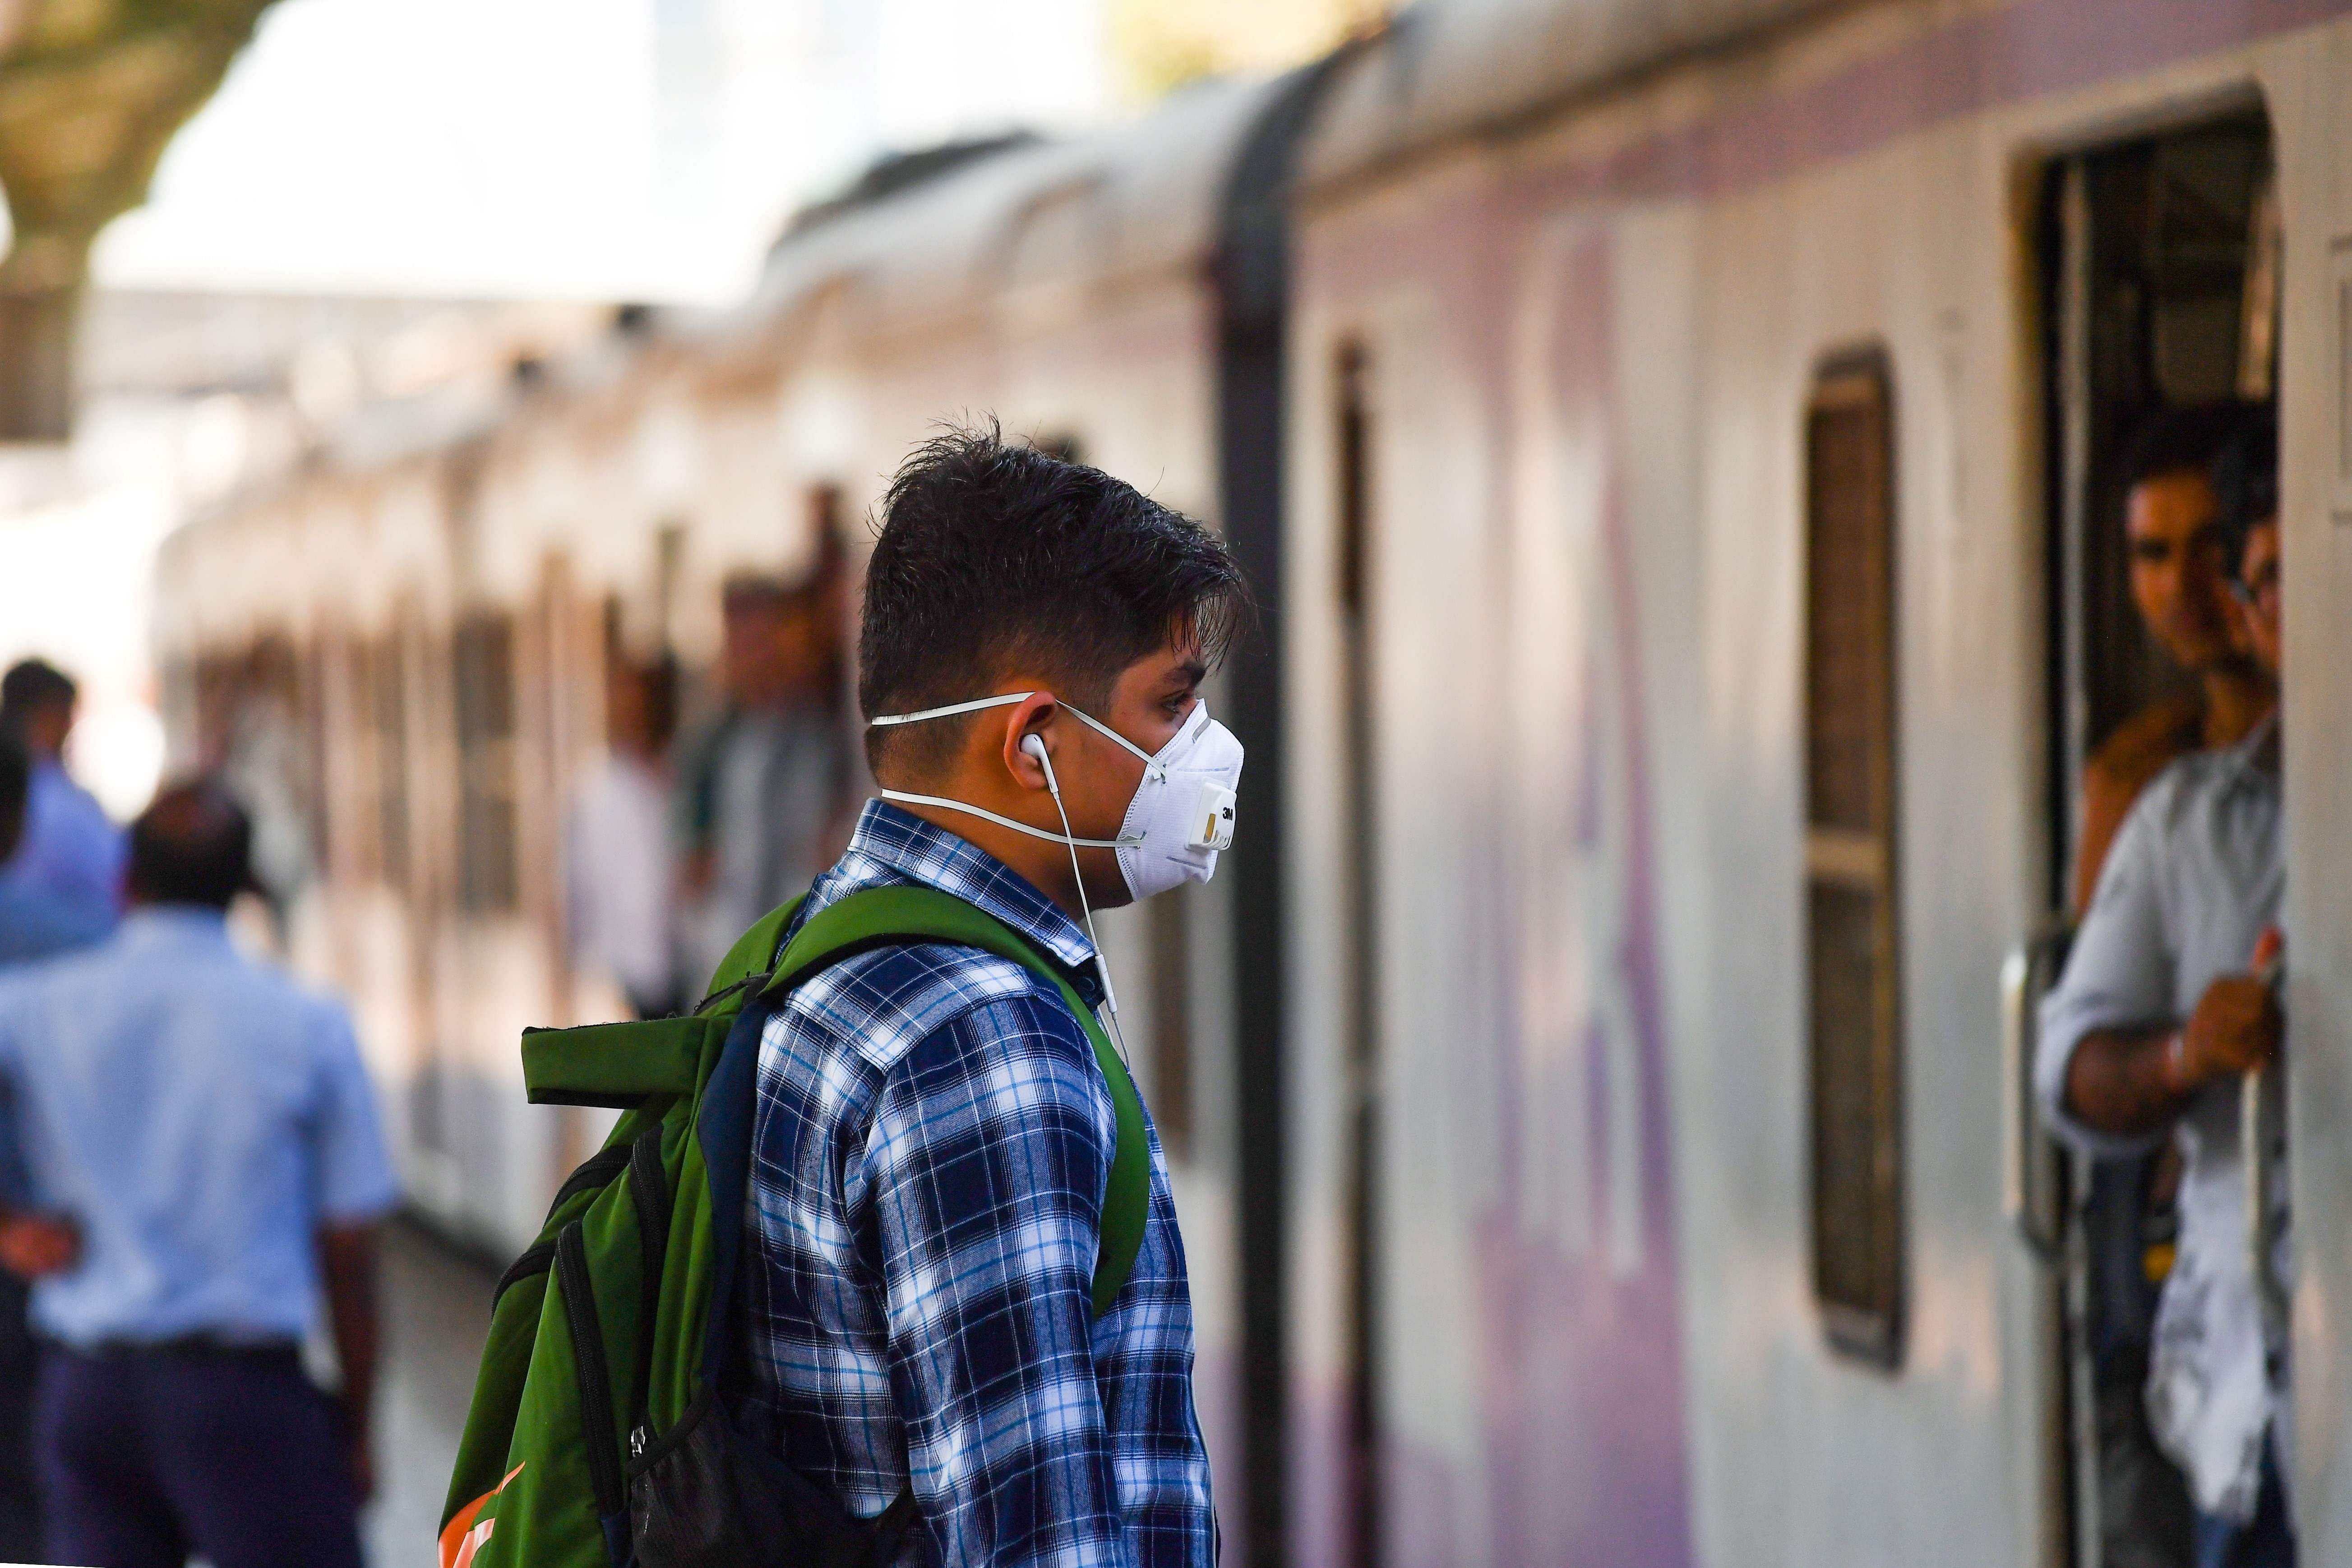 A man wearing a facemask amid concerns over the spread of the COVID-19 coronavirus arrives at a train station in Mumbai. (Credit: AFP)